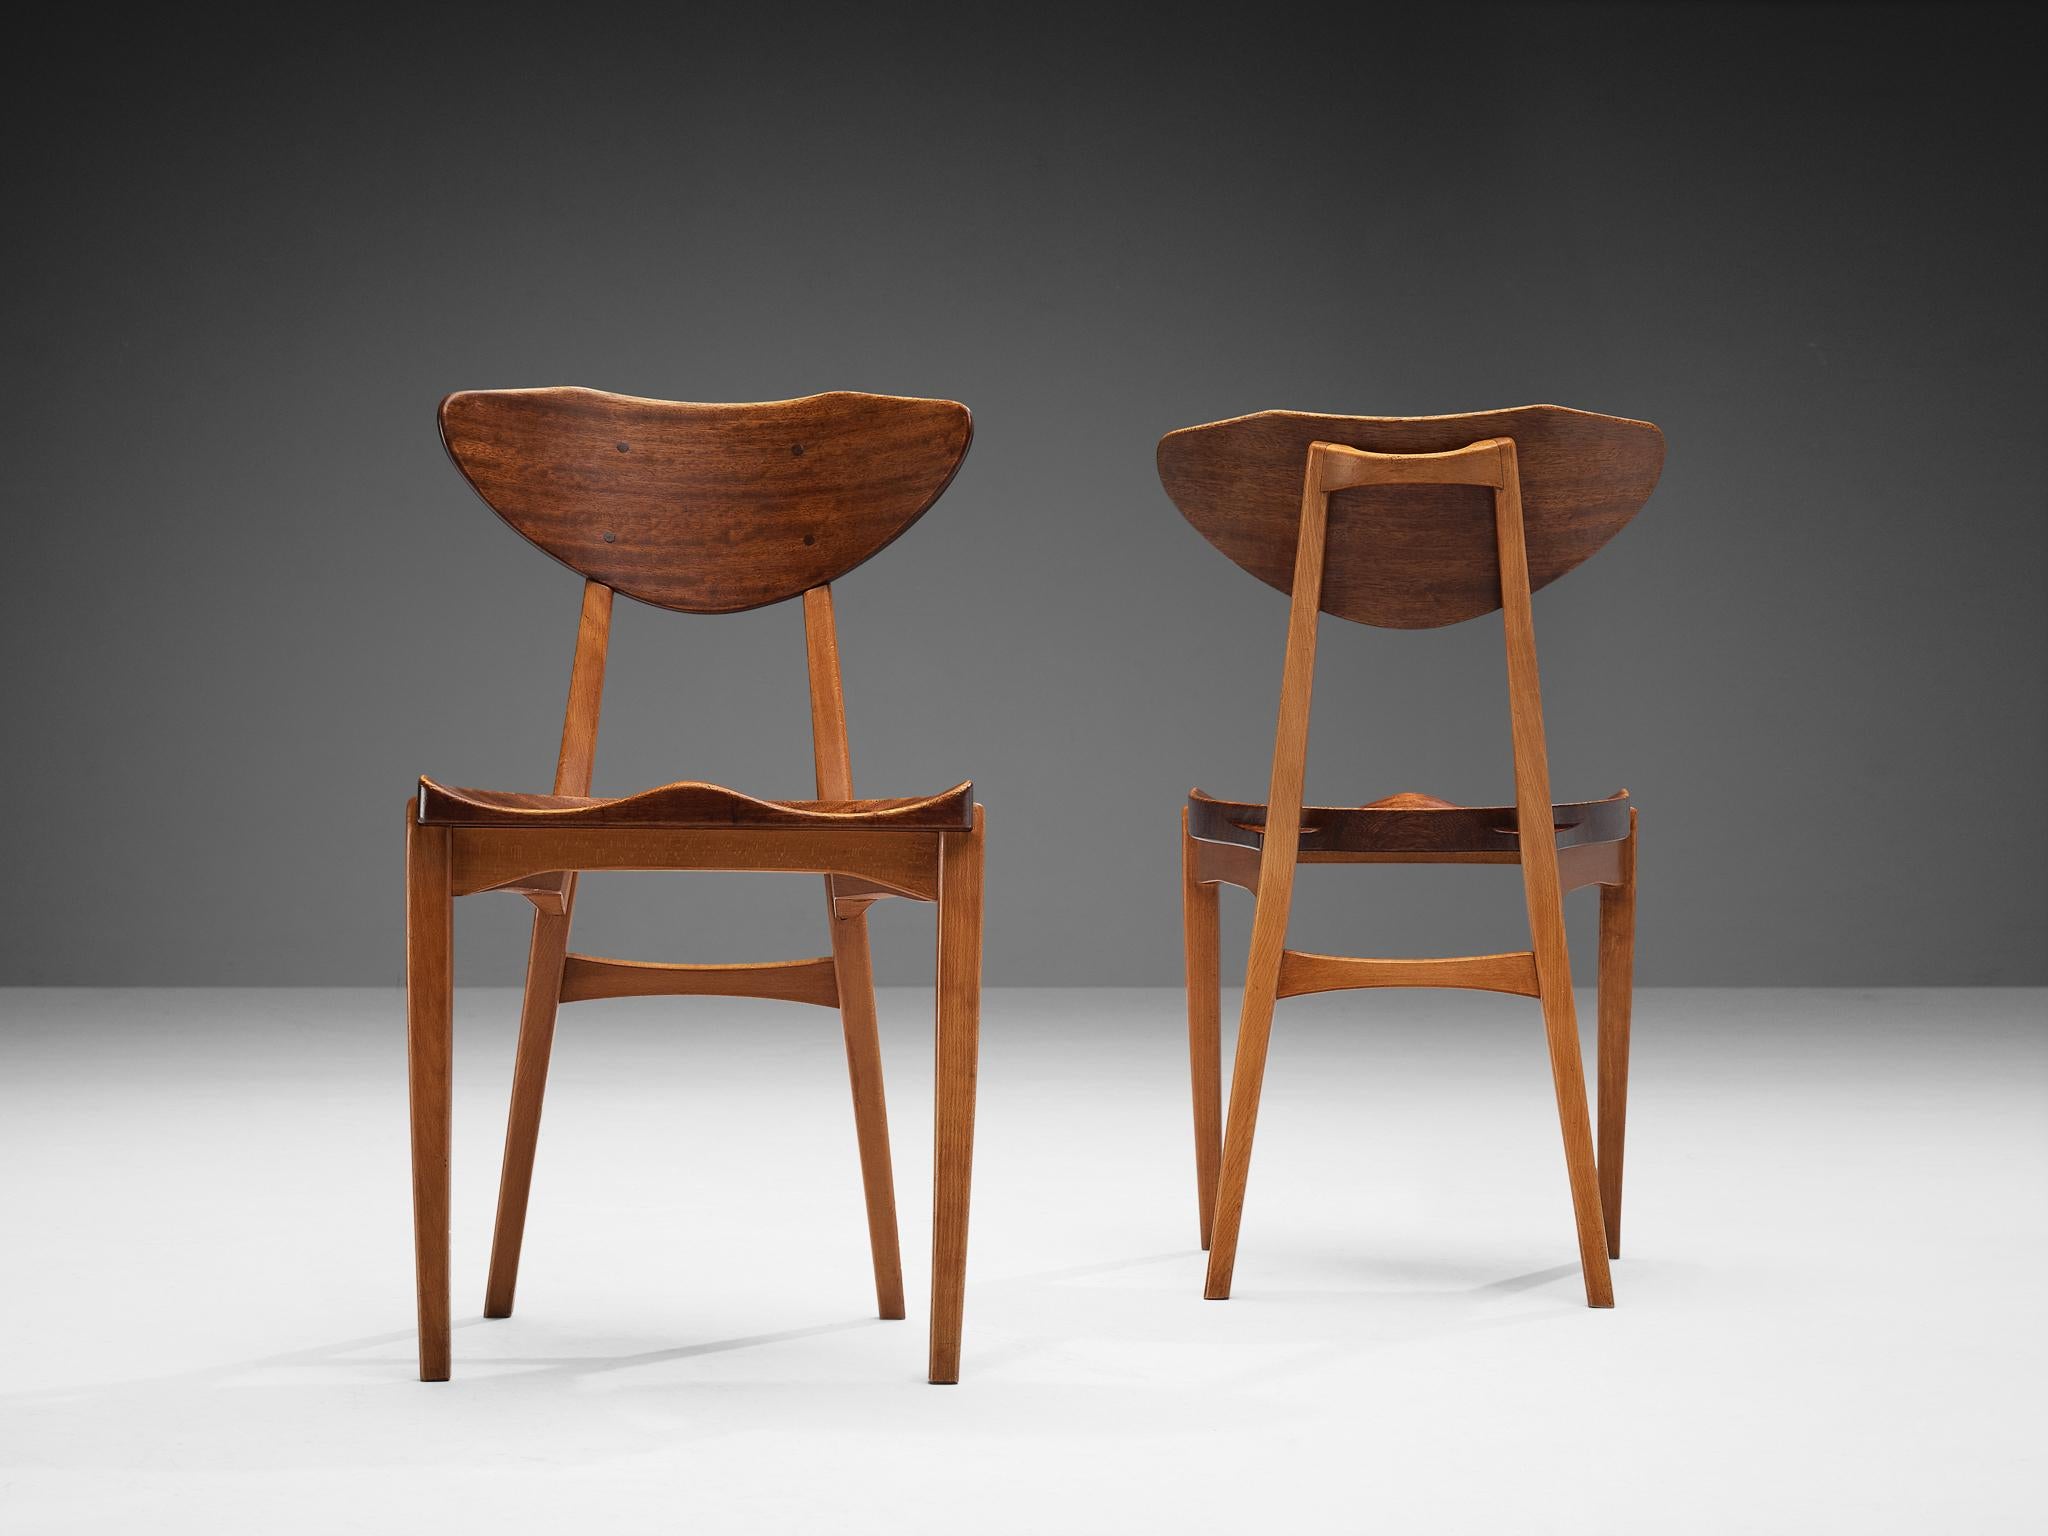 Richard Jensen and Kjaerulff Rasmussen, pair of dining chairs, mahogany, Denmark, 1960s

This striking pair of dining chairs was designed by Richard Jensen and Kjaerulff Rasmussen. What characterizes the chair is the combination of angled frame and